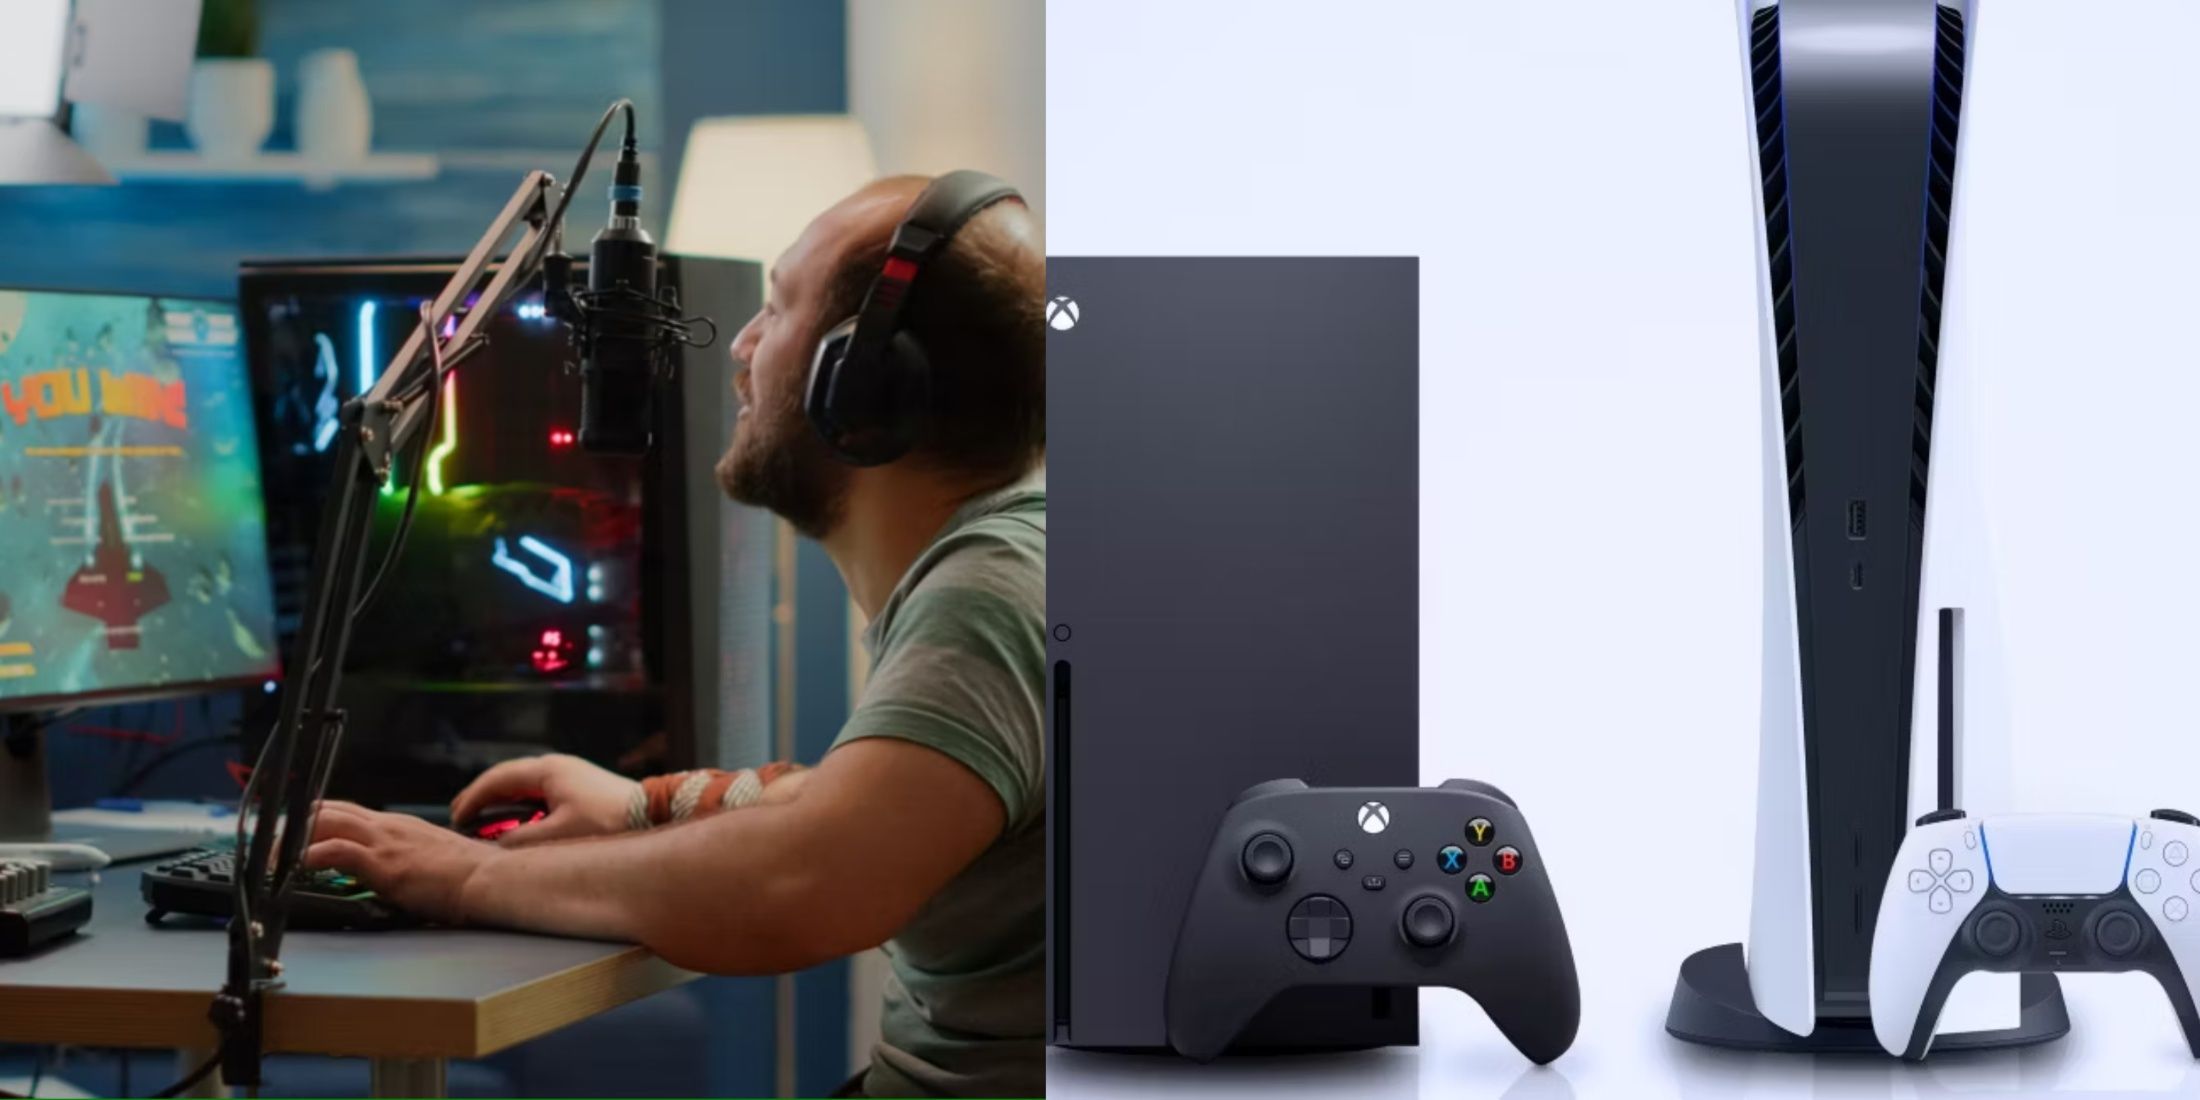 A man gaming at a PC next to an image of the Xbox Series X and PlayStation 5.